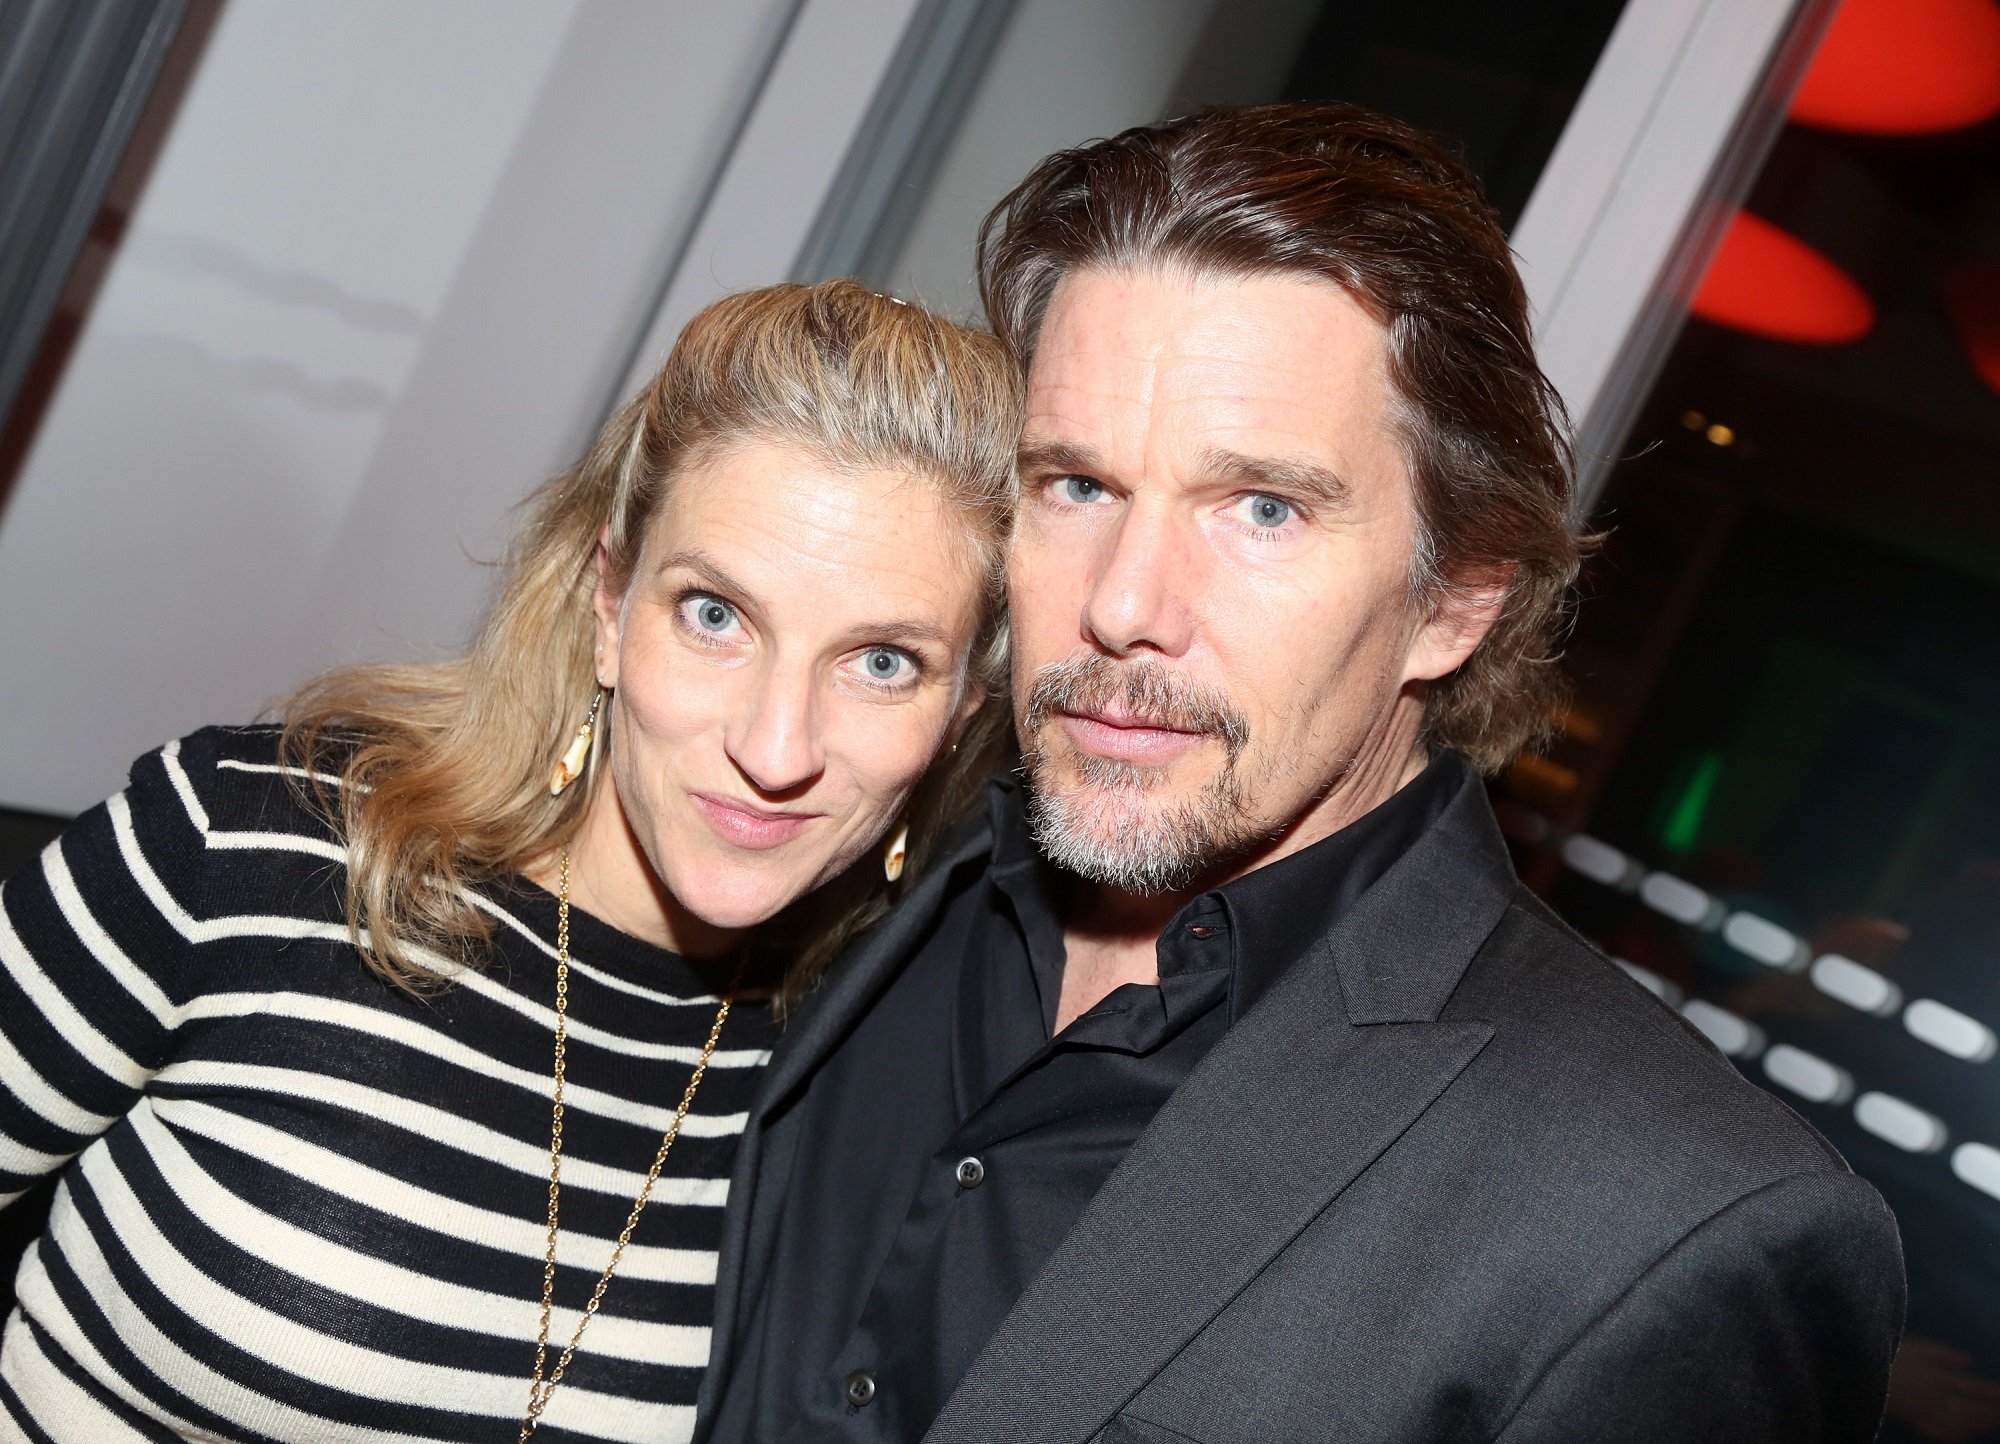 Ryan Hawke and Ethan Hawke pose at the opening night party for the new musical 'Bob & Carol & Ted & Alice' on February 4, 2020, in New York City.